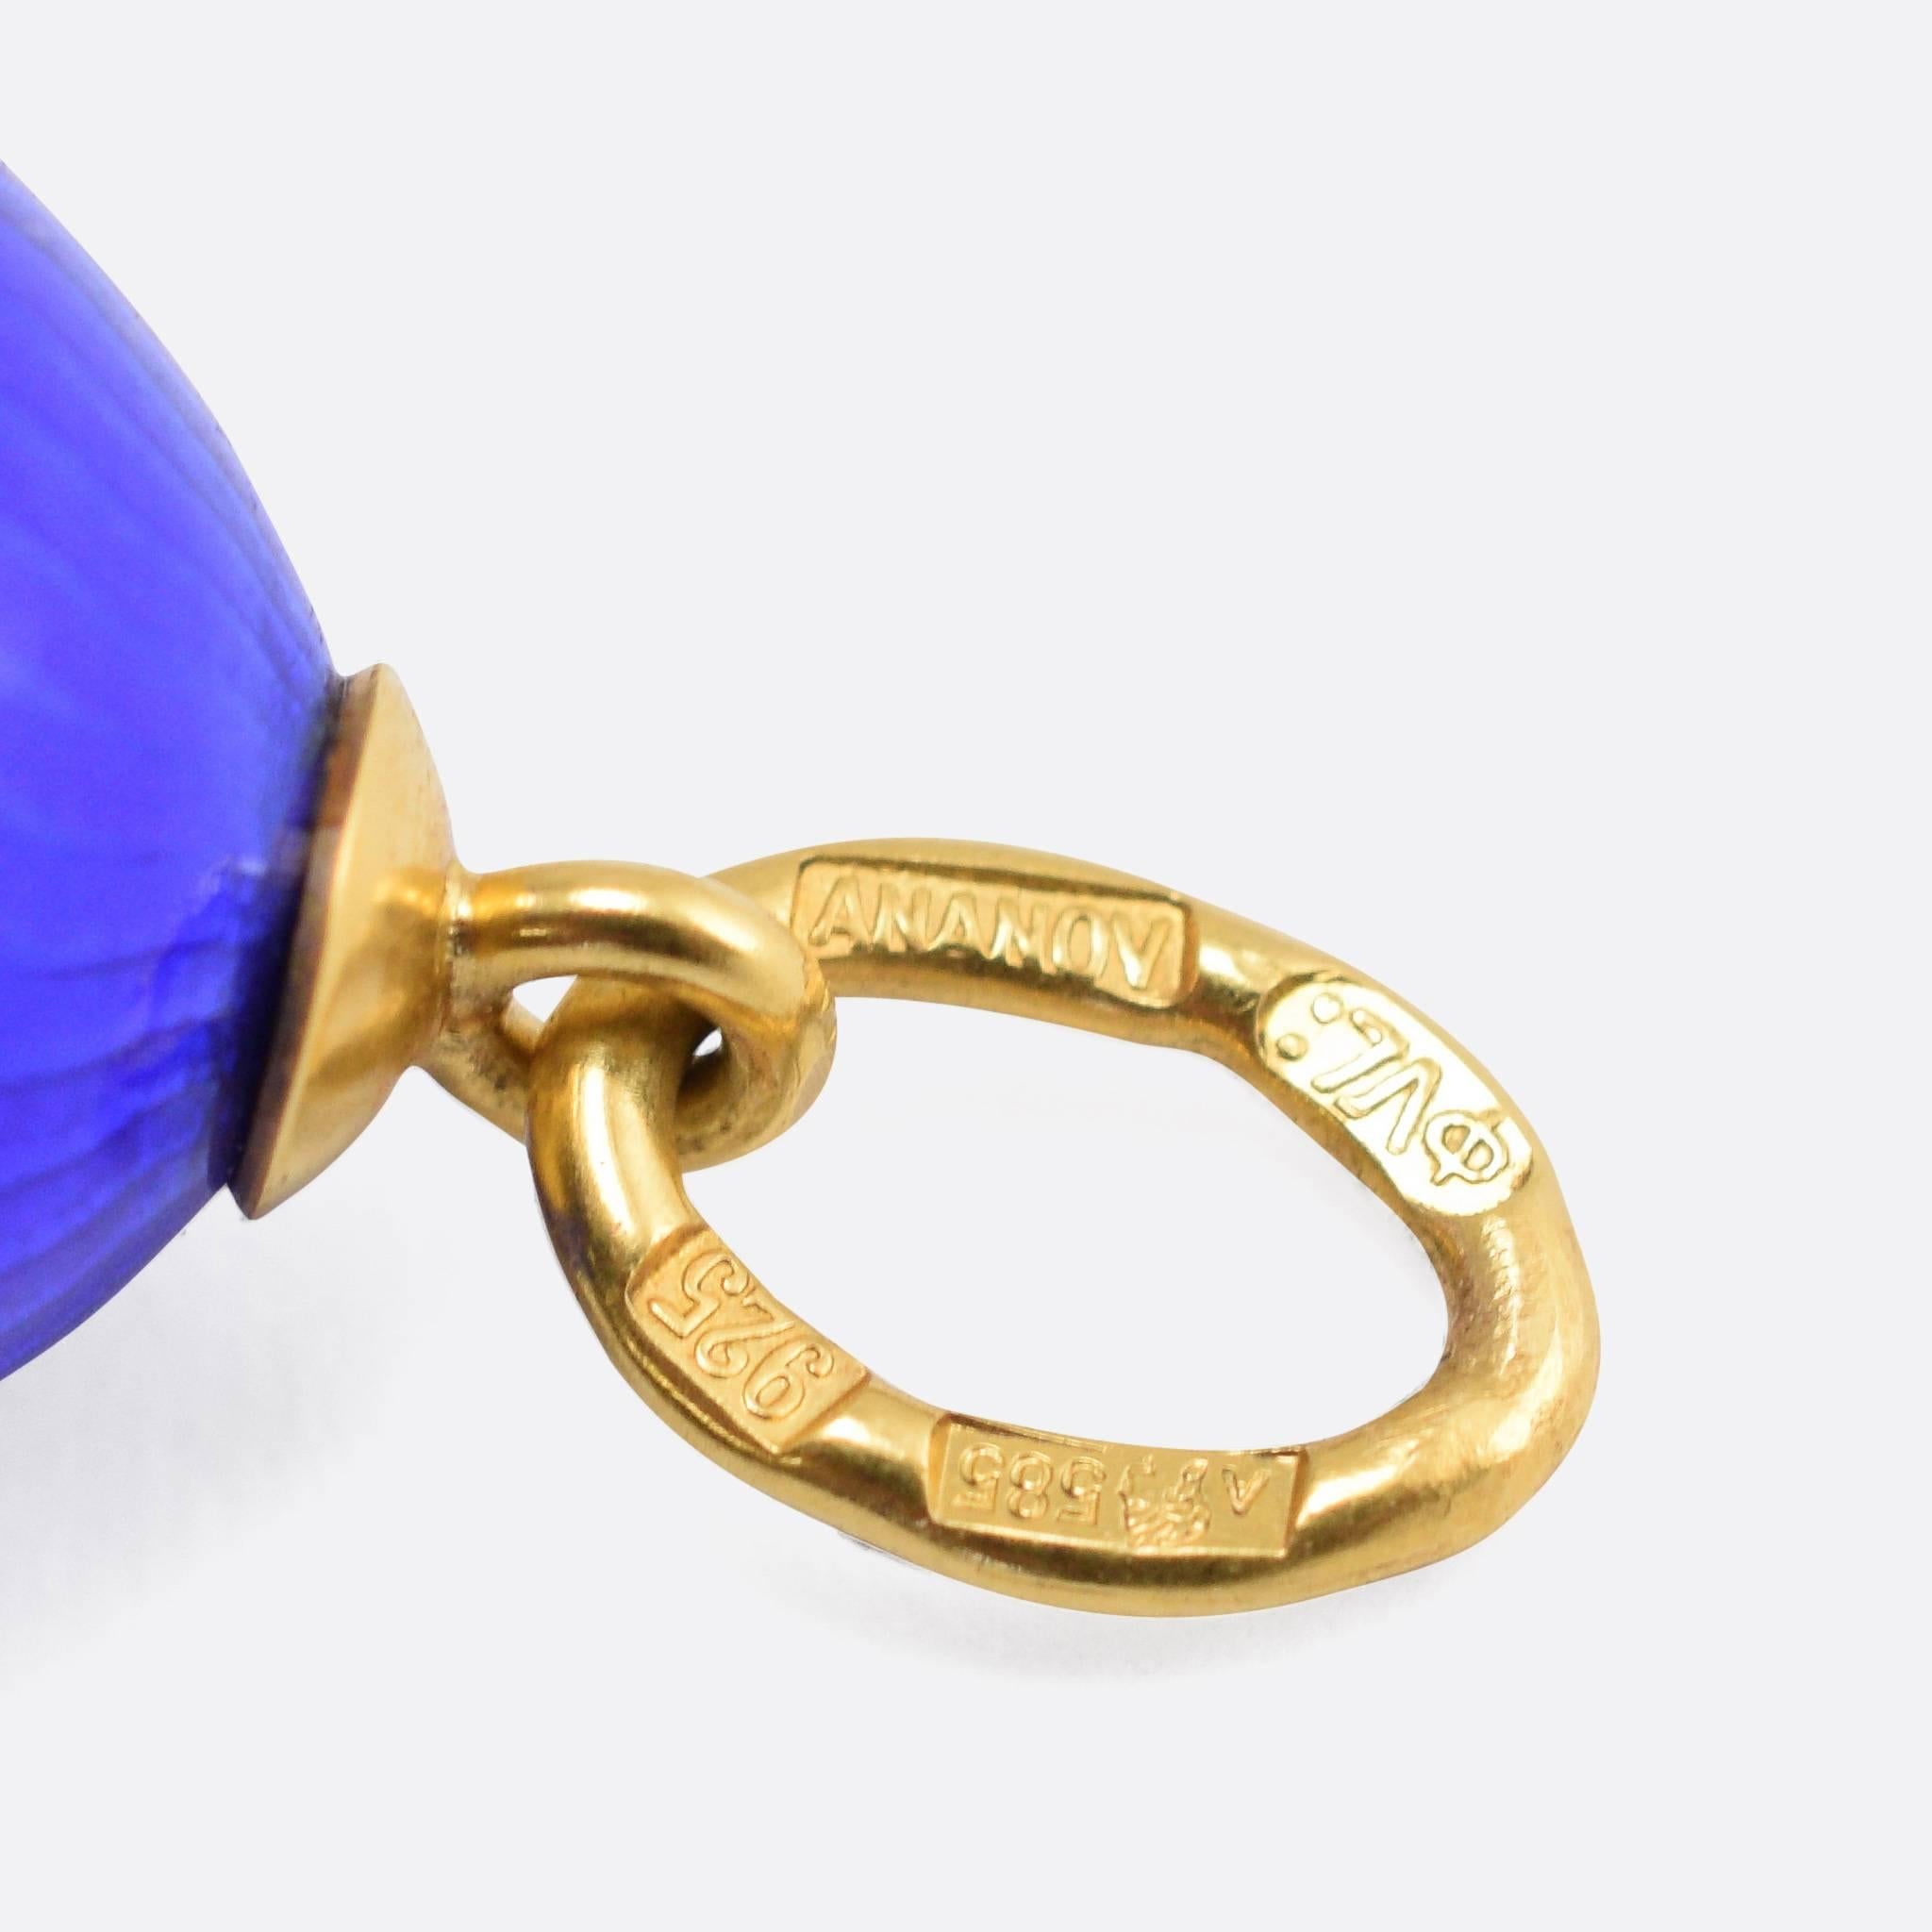 This beautiful Miniature Egg Pendant is by the celebrated jewellery maker Andrey Ananov. The egg is modelled in Sterling silver, with 14k gold fittings, and finished in fine deep blue guilloché enamel. A gold band around the middle is features a bow